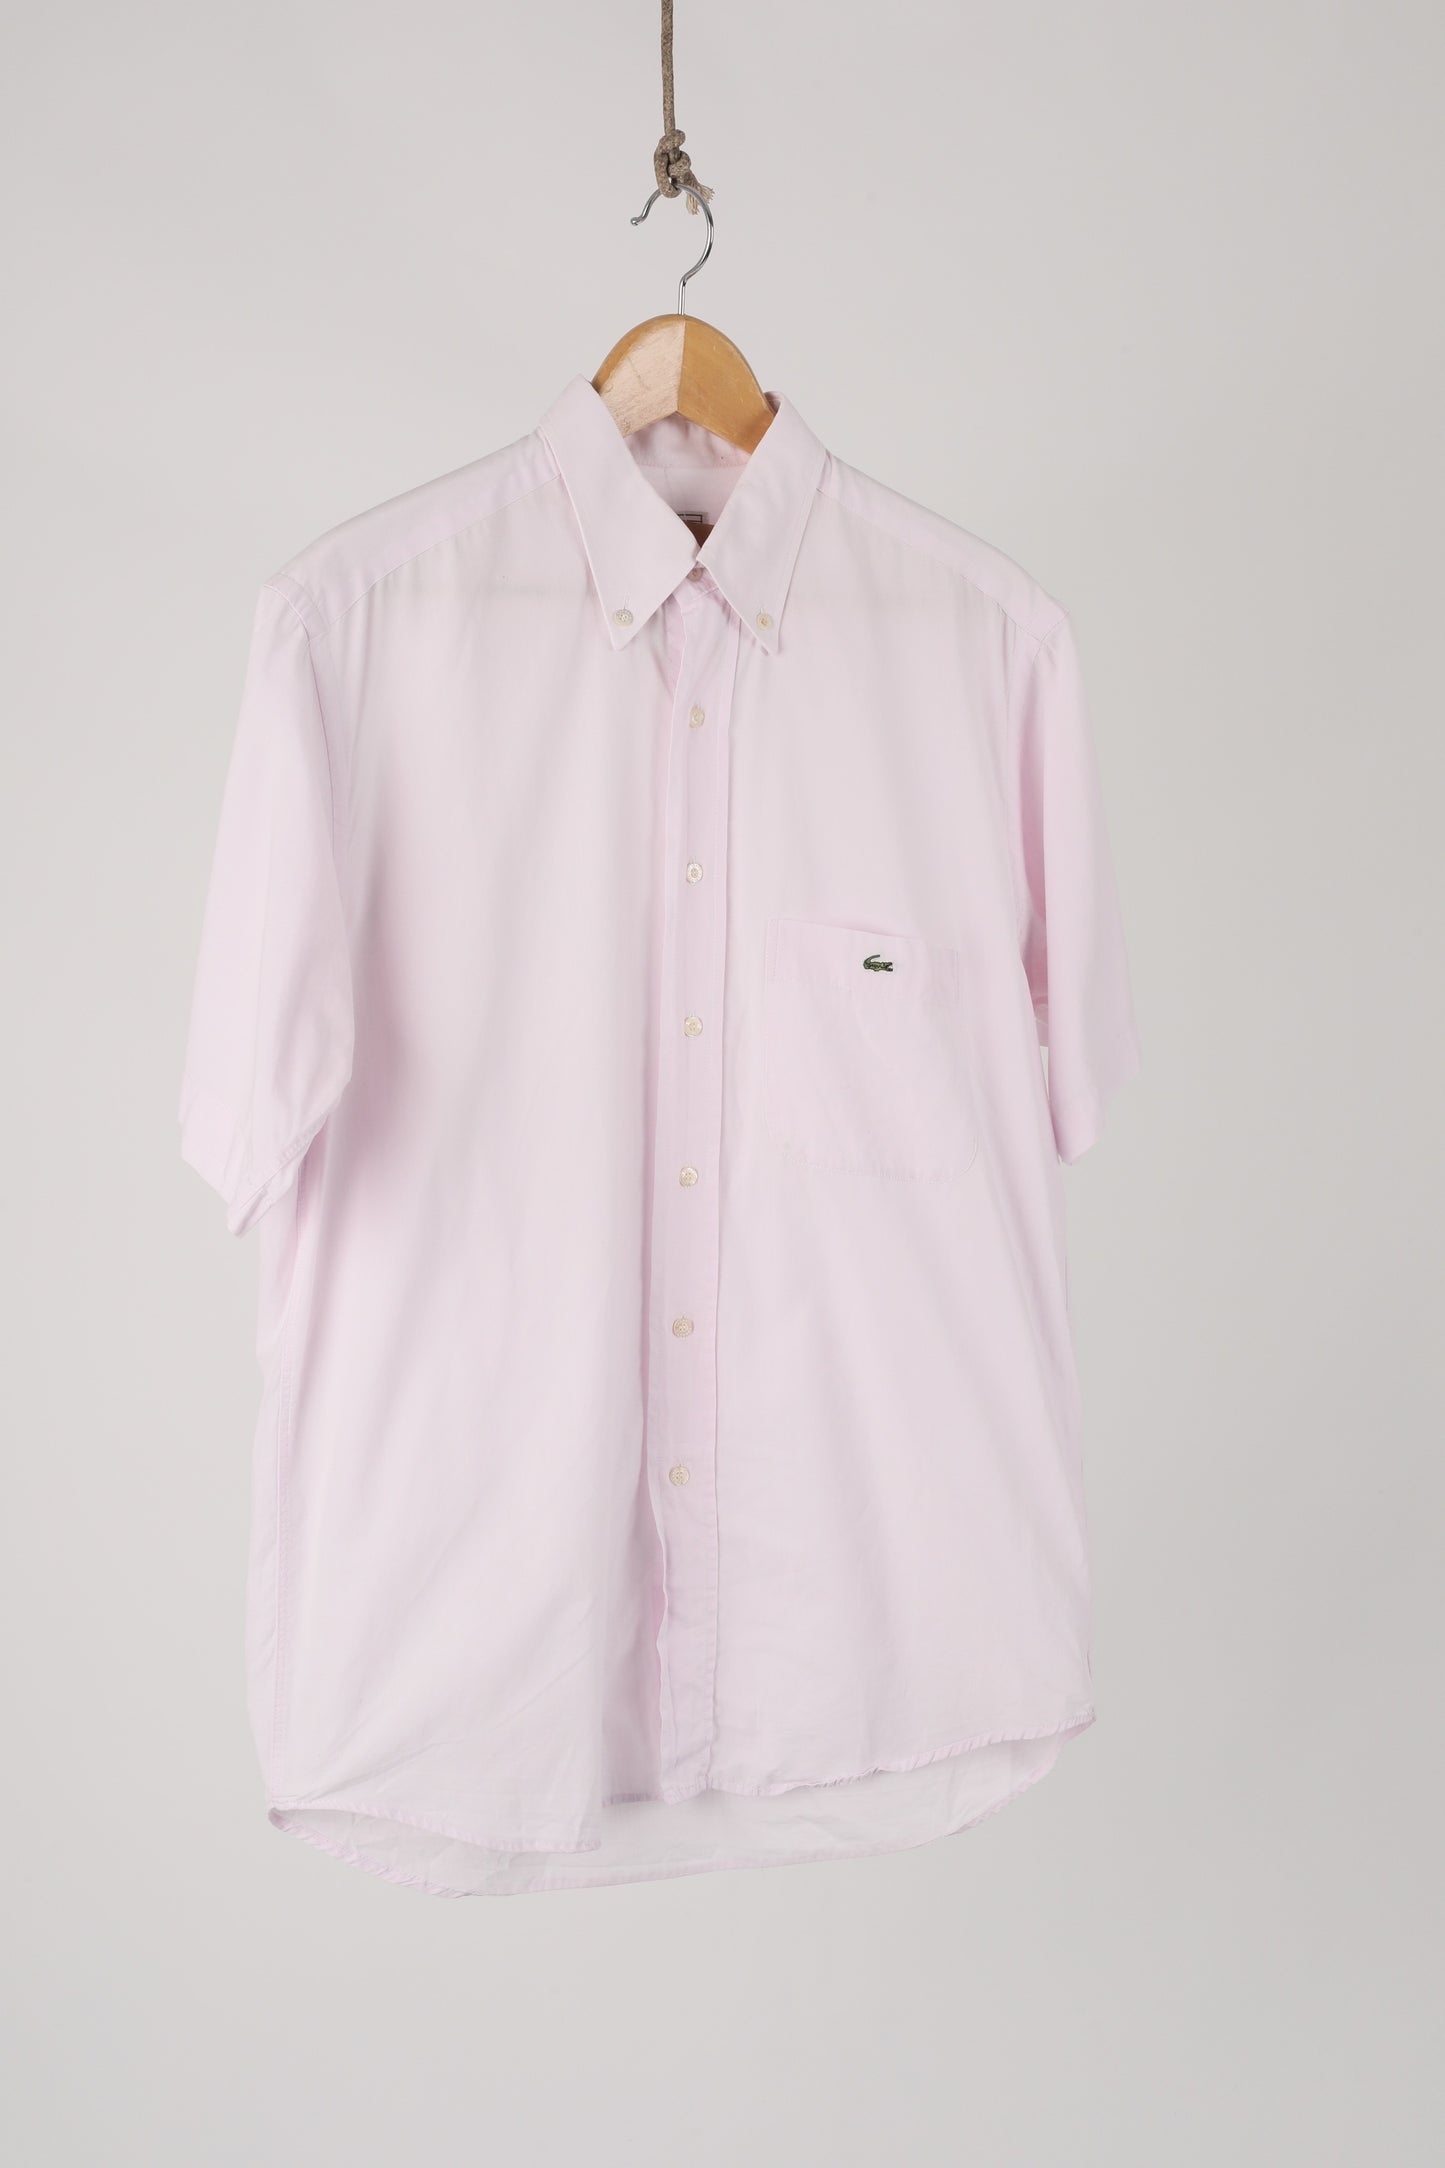 90s Lacoste baby pink short sleeve Oxford shirt (40)